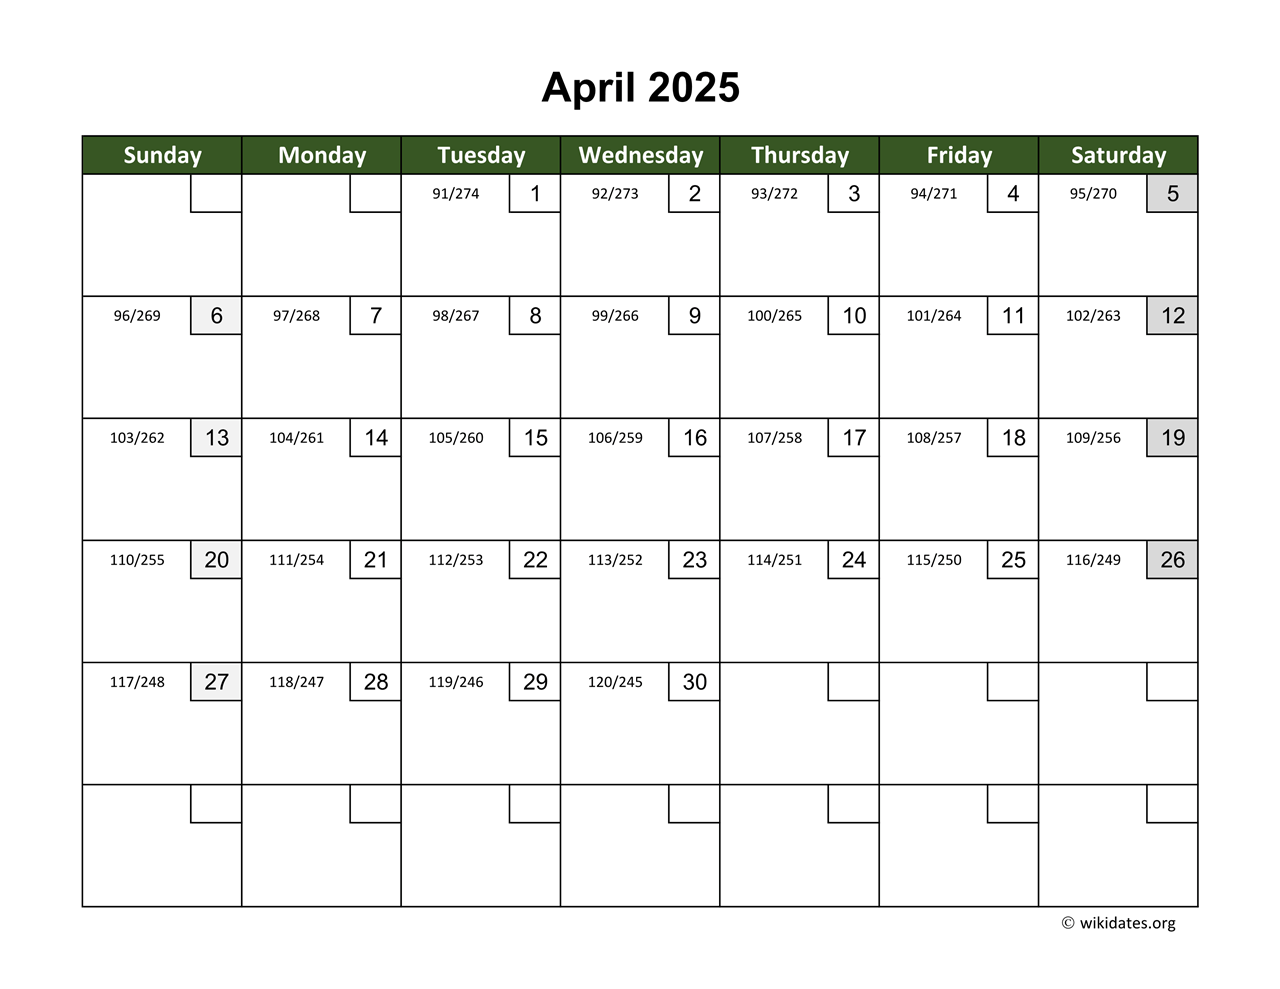 april-2025-calendar-with-day-numbers-wikidates